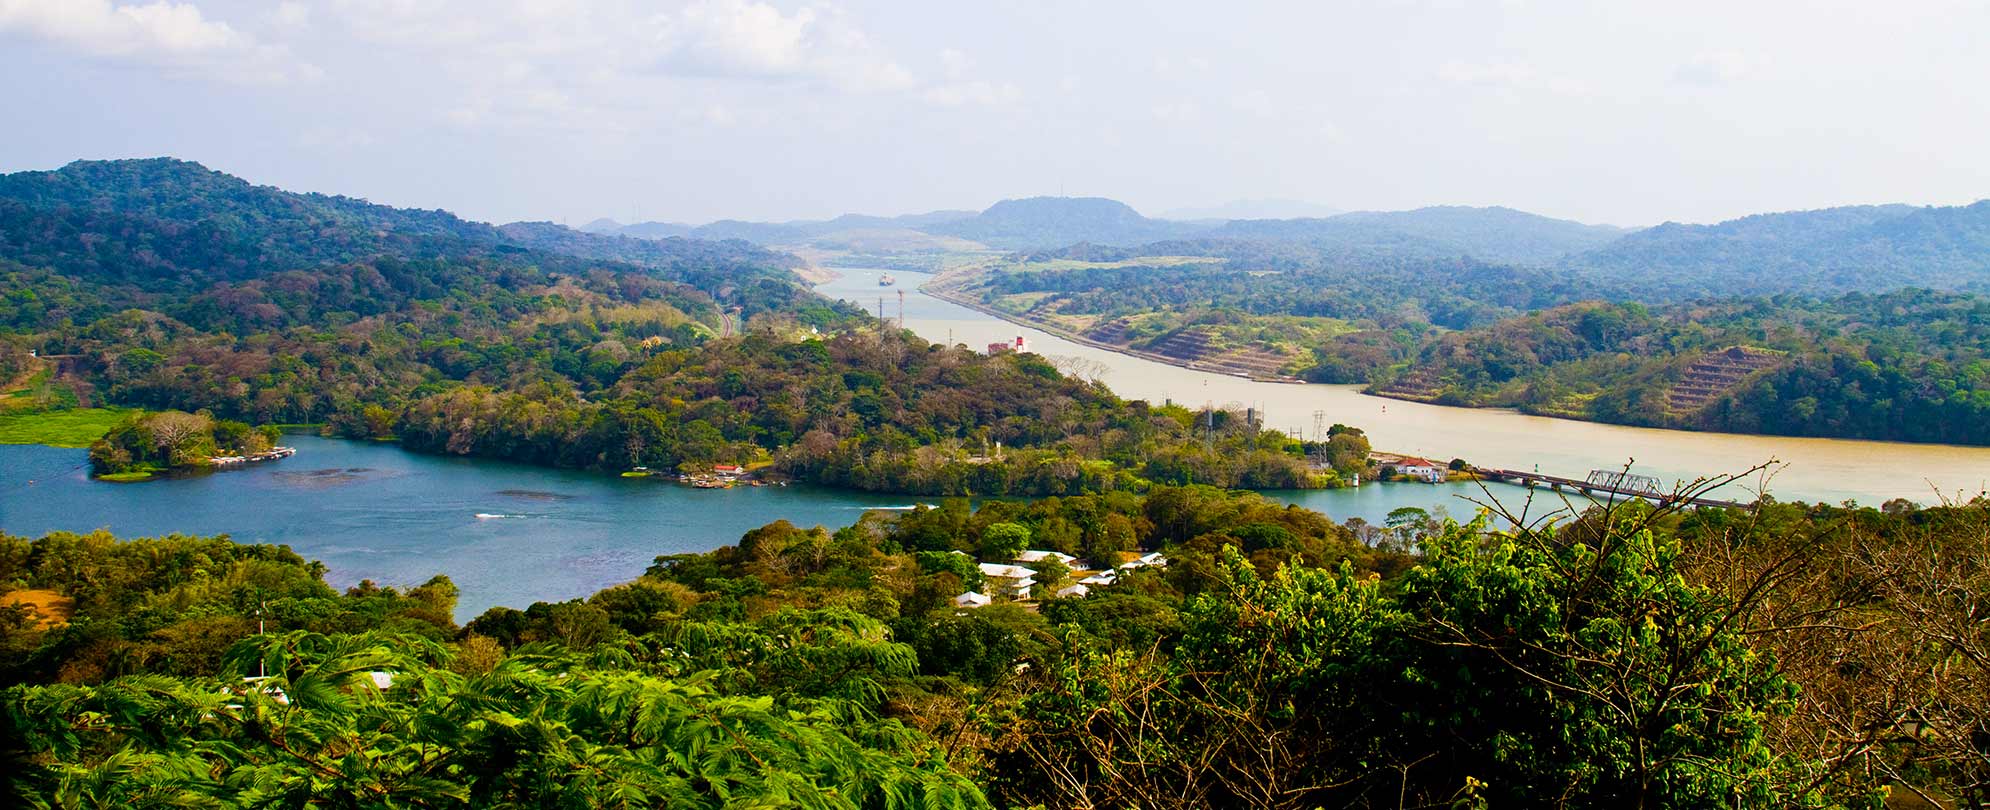 Panoramic view of the Panama Canal.